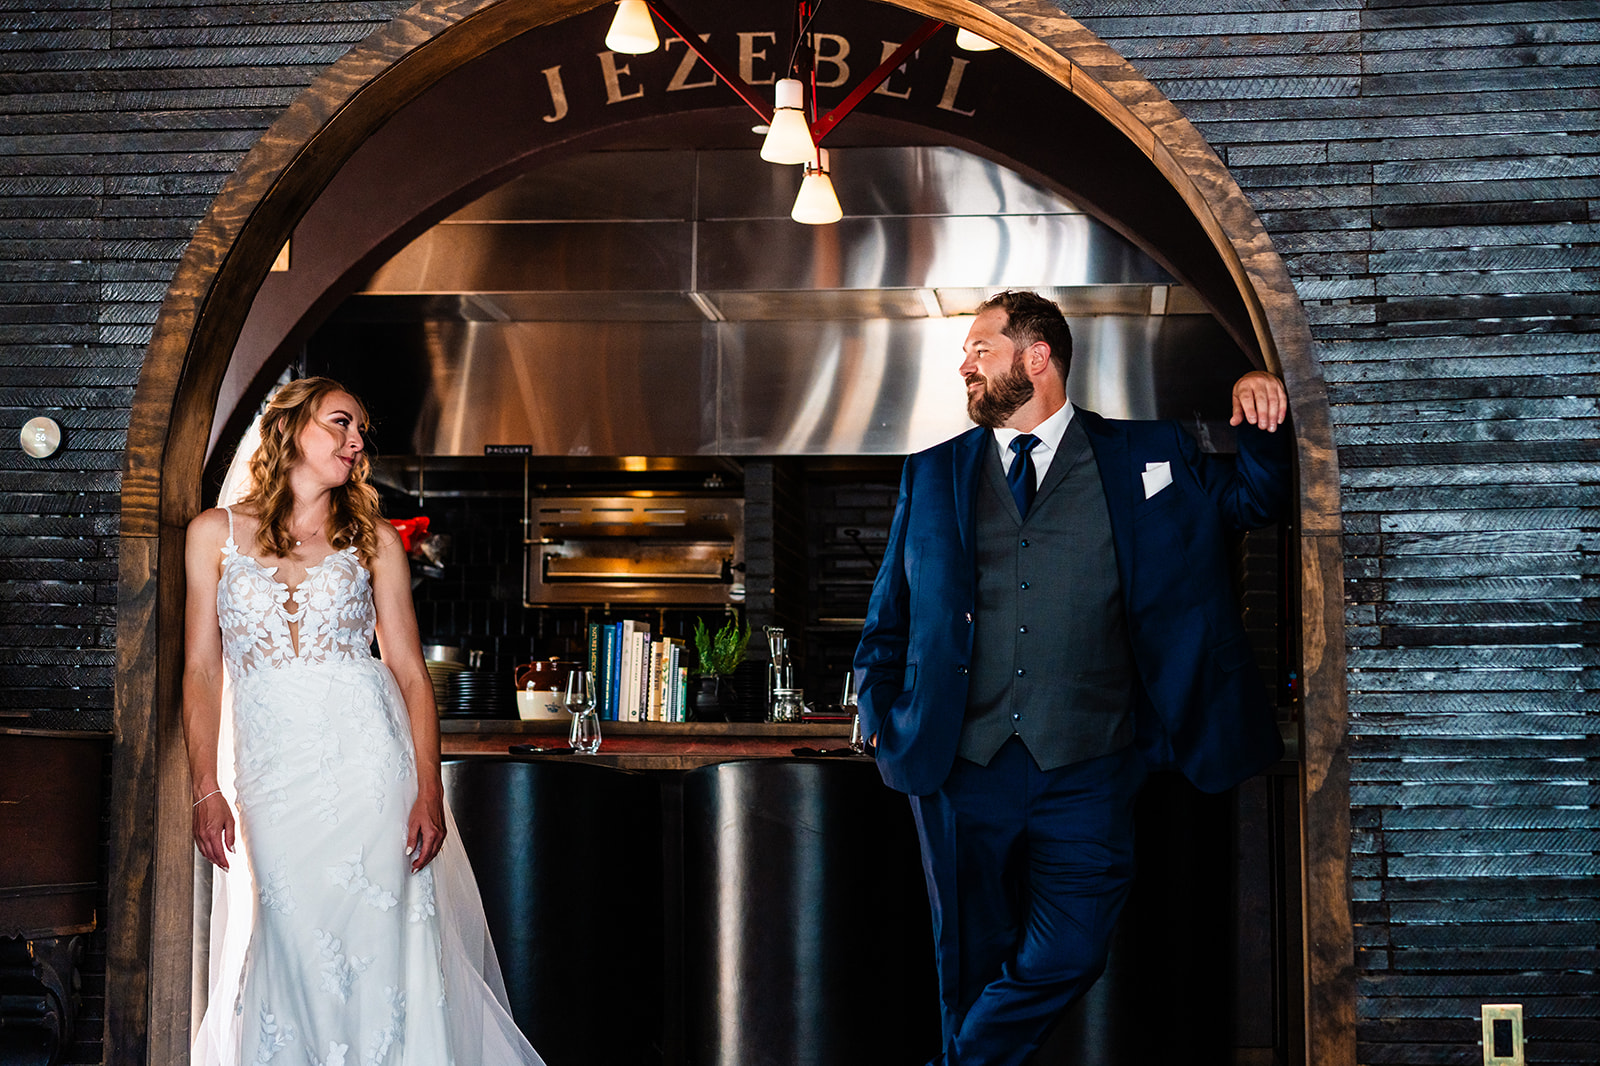 Bride and groom looking at one another posing next to a restaurant bar